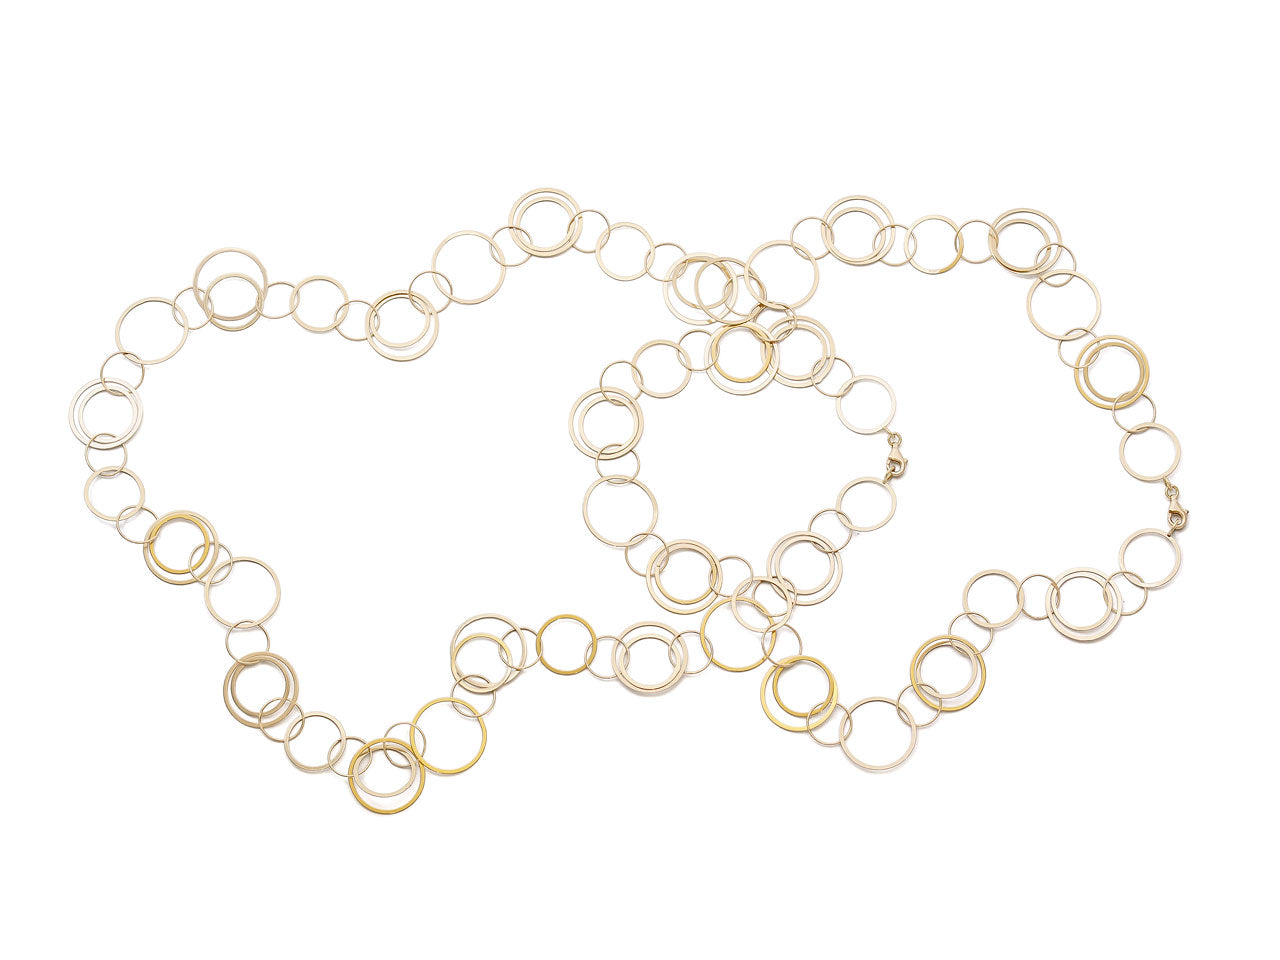 Pair of Circle Link Necklace in 18K Gold